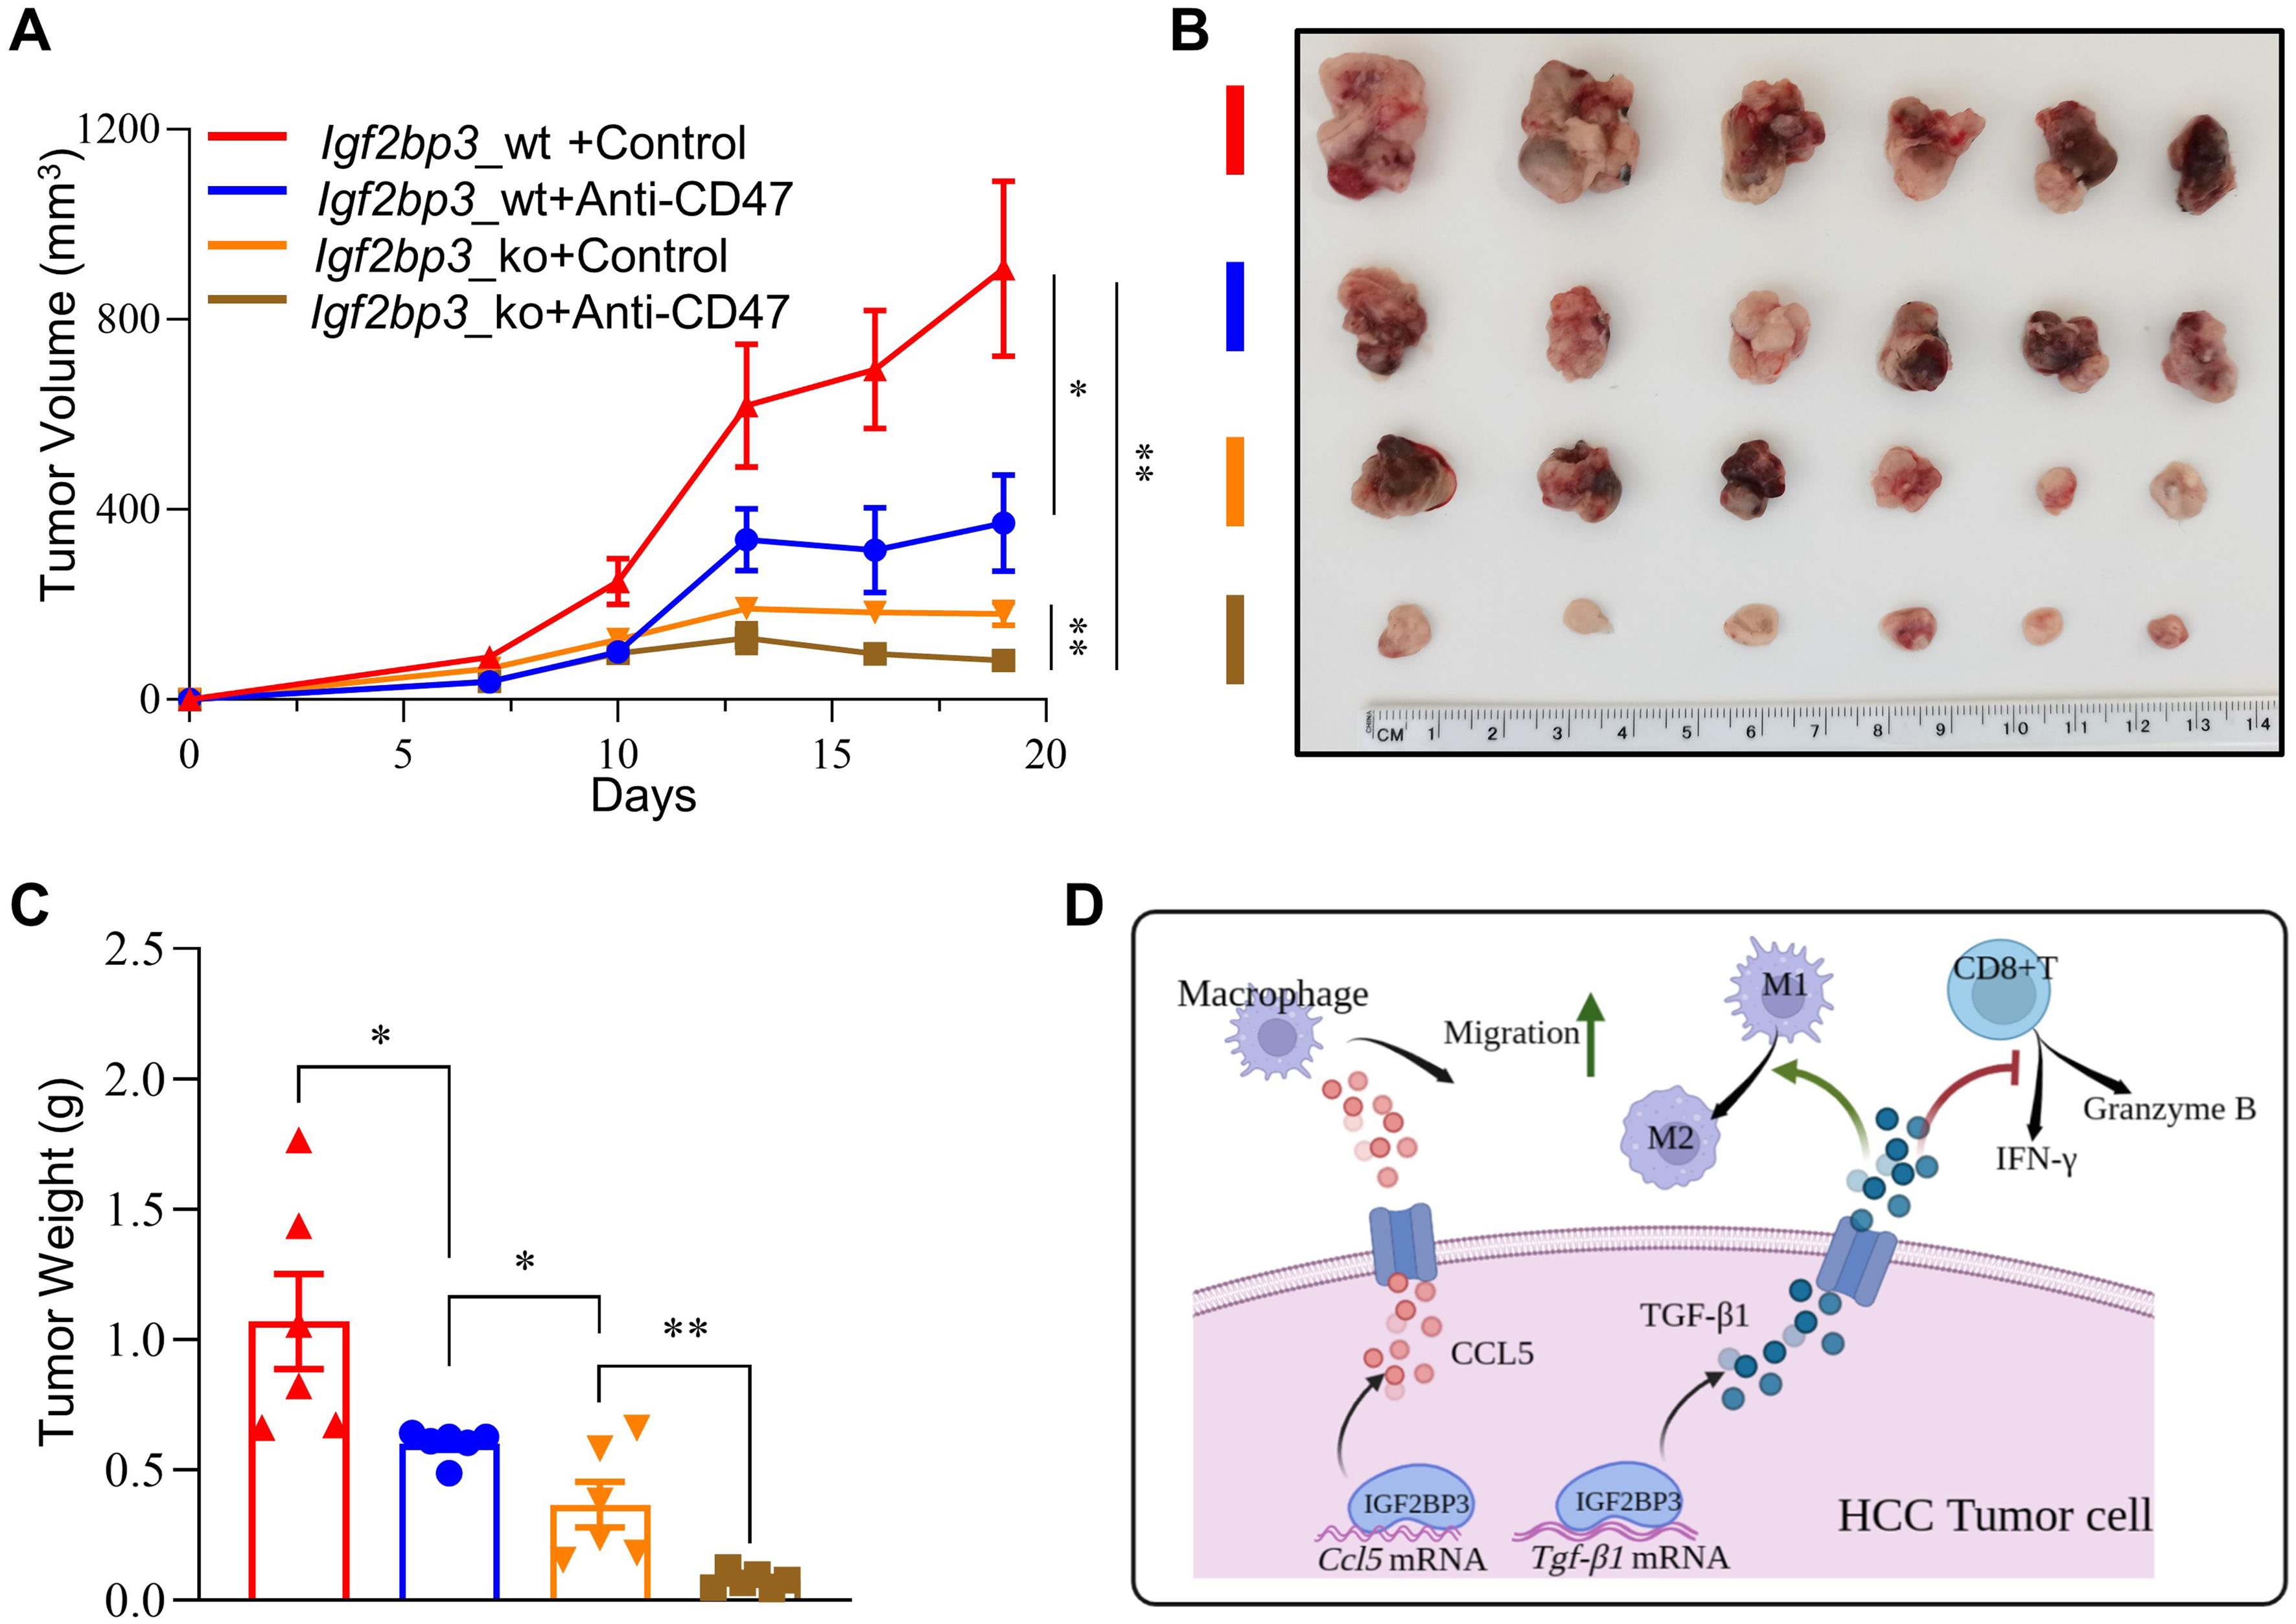 Combined treatment with <italic>Igf2bp3</italic> knockout and CD47 blockade has synergistic antitumorigenic effects in the mouse HCC model.